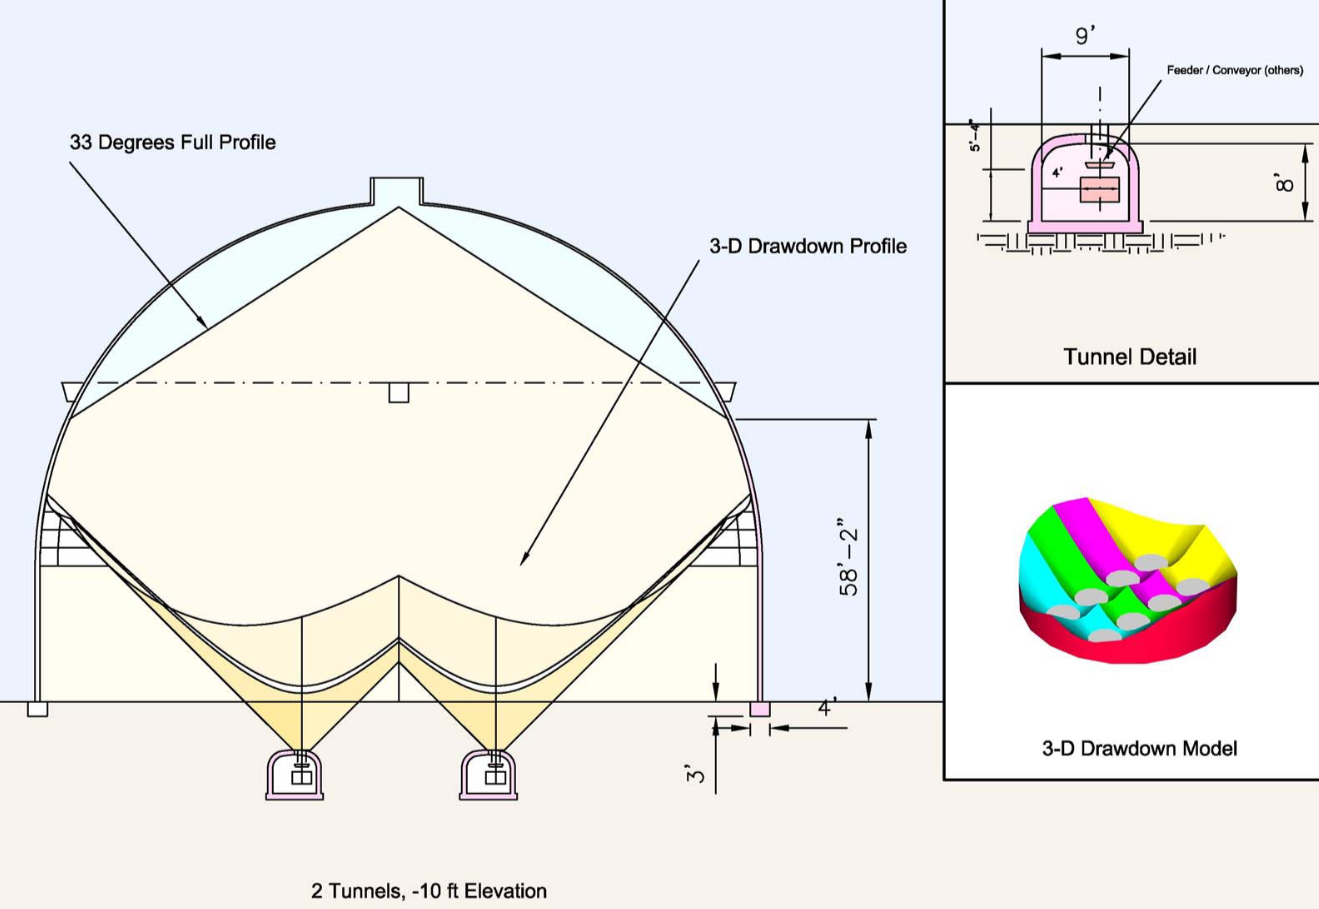 bulk-storage-choices-feature-article-figure 1 -two tunnels gravity feed